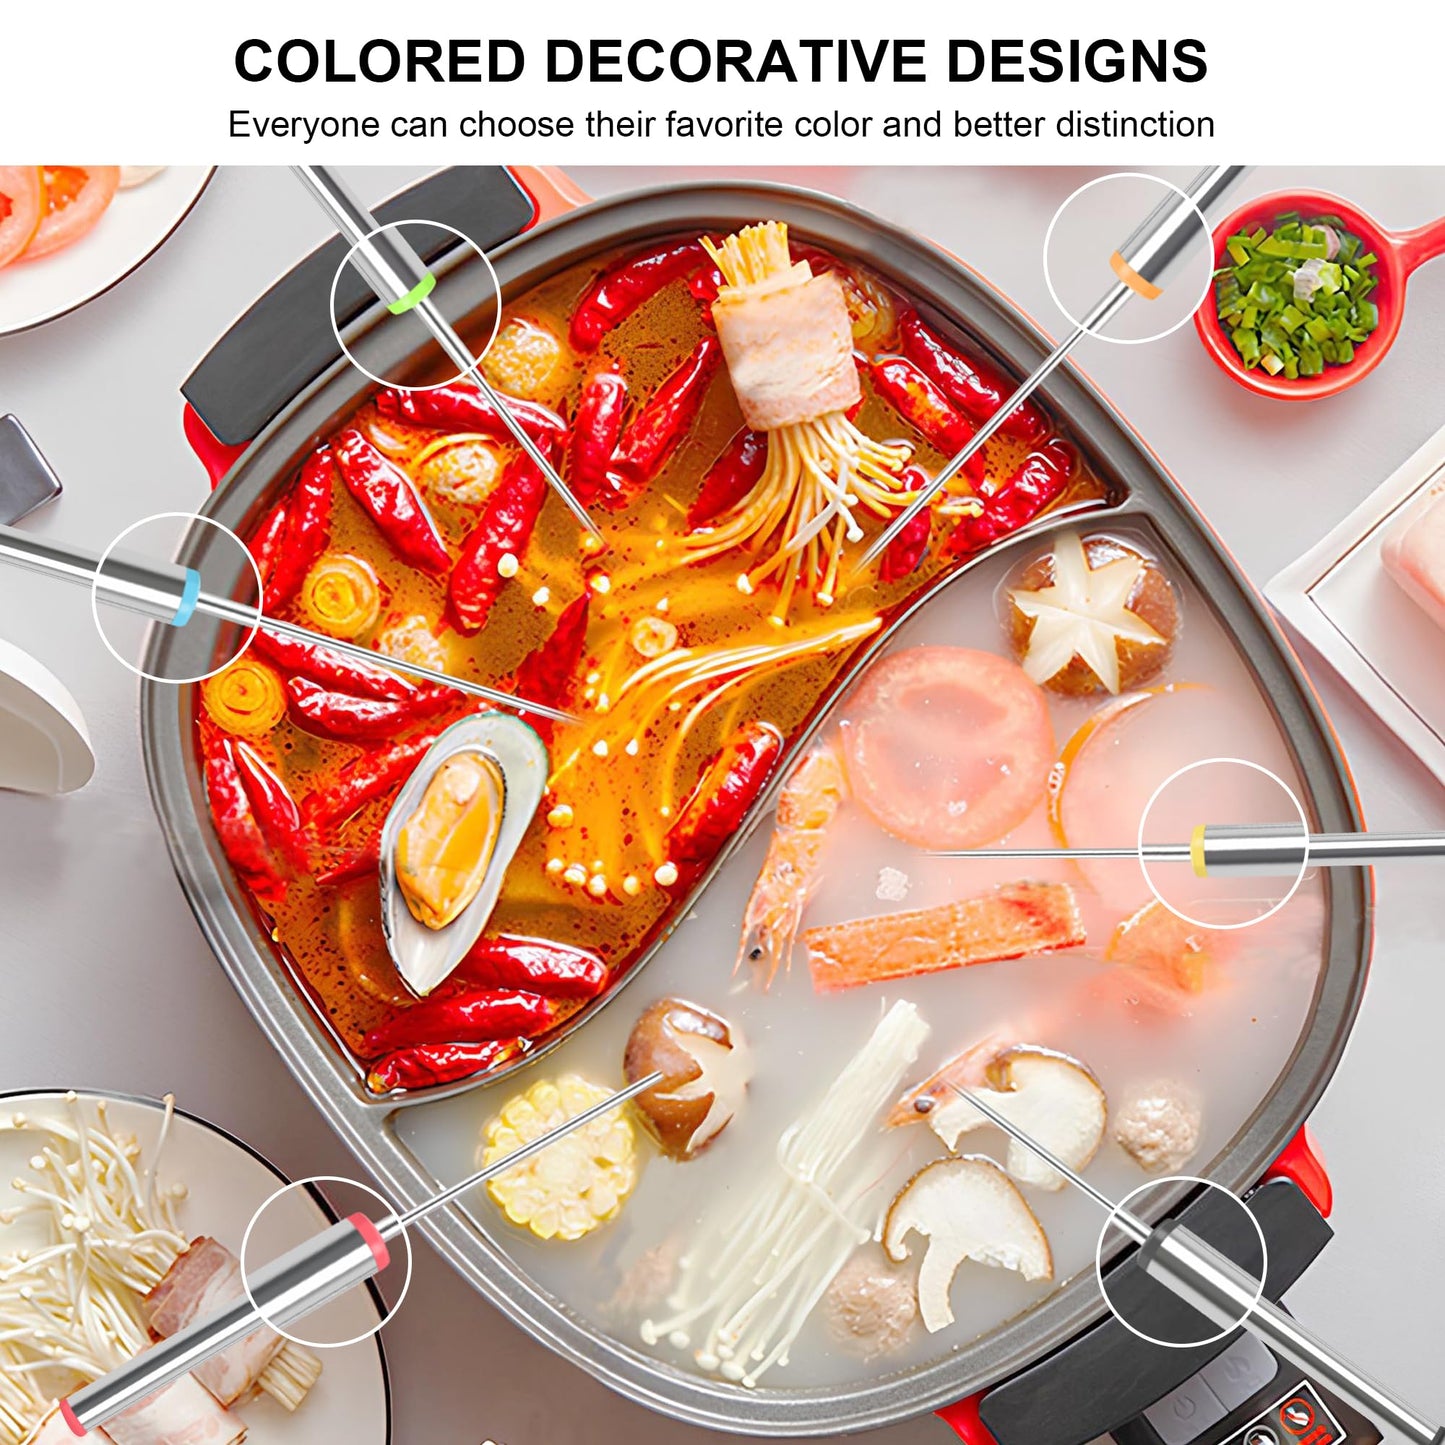 Fondue Forks, 6pcs 9.5 Inch Color-Coded Fondue Forks, Stainless Steel Fondue Sticks Heat Resistant Handle, Dishwasher Safe For Chocolate Fountain, Cheese, Hot Pot, Barbecue, Marshmallows